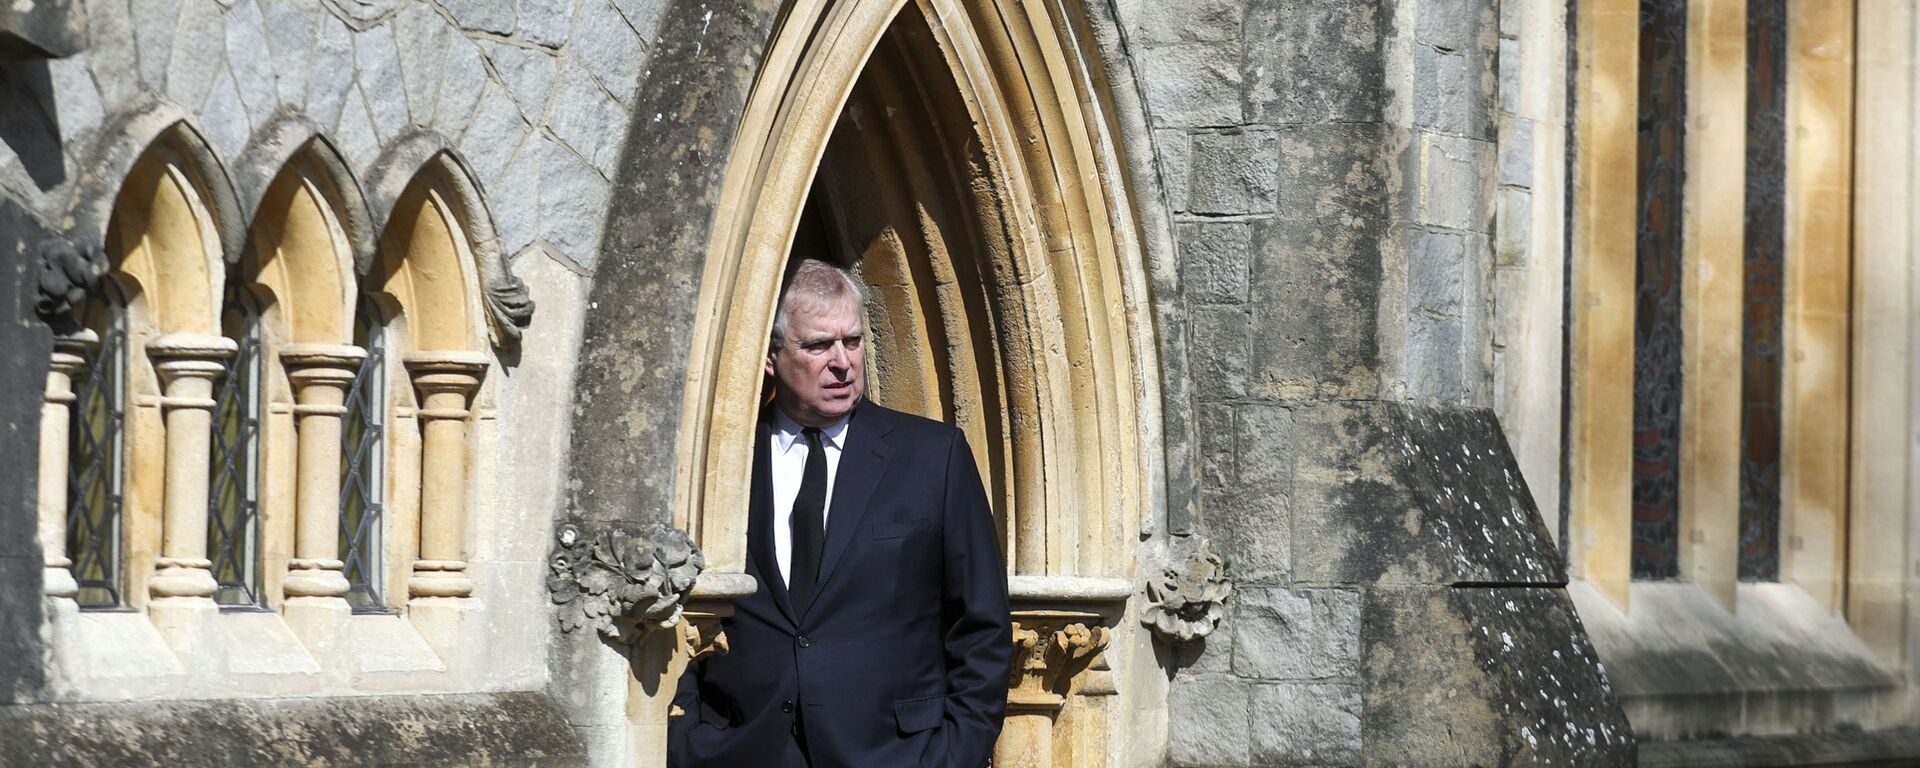 Britain's Prince Andrew attends the Sunday service at the Royal Chapel of All Saints at Royal Lodge, Windsor, following the death announcement of his father, Prince Philip, in England, Sunday, April 11, 2021. - Sputnik International, 1920, 31.12.2021